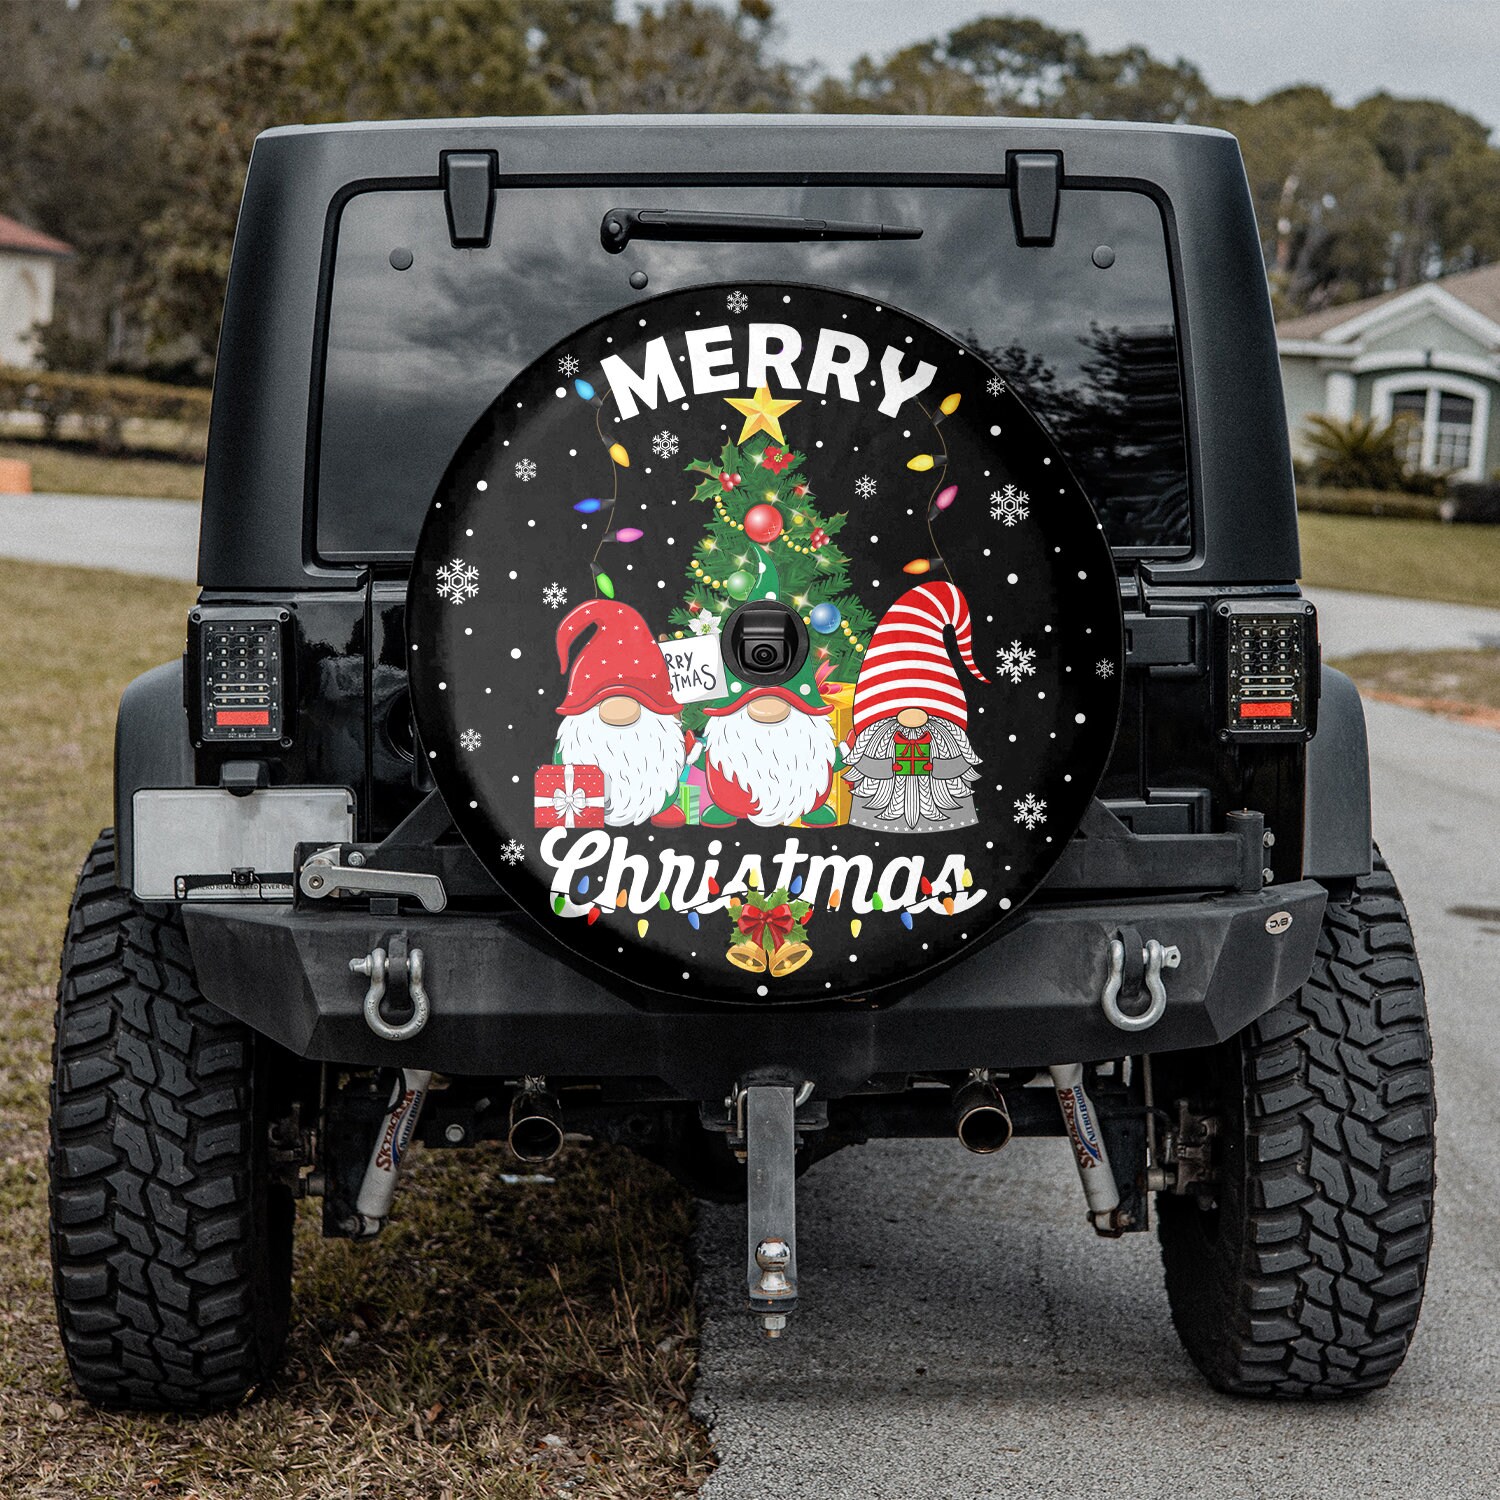 Discover Merry Christmas Gnome Tire Cover, Xmas Tree Camper Truck Spare Tire Cover